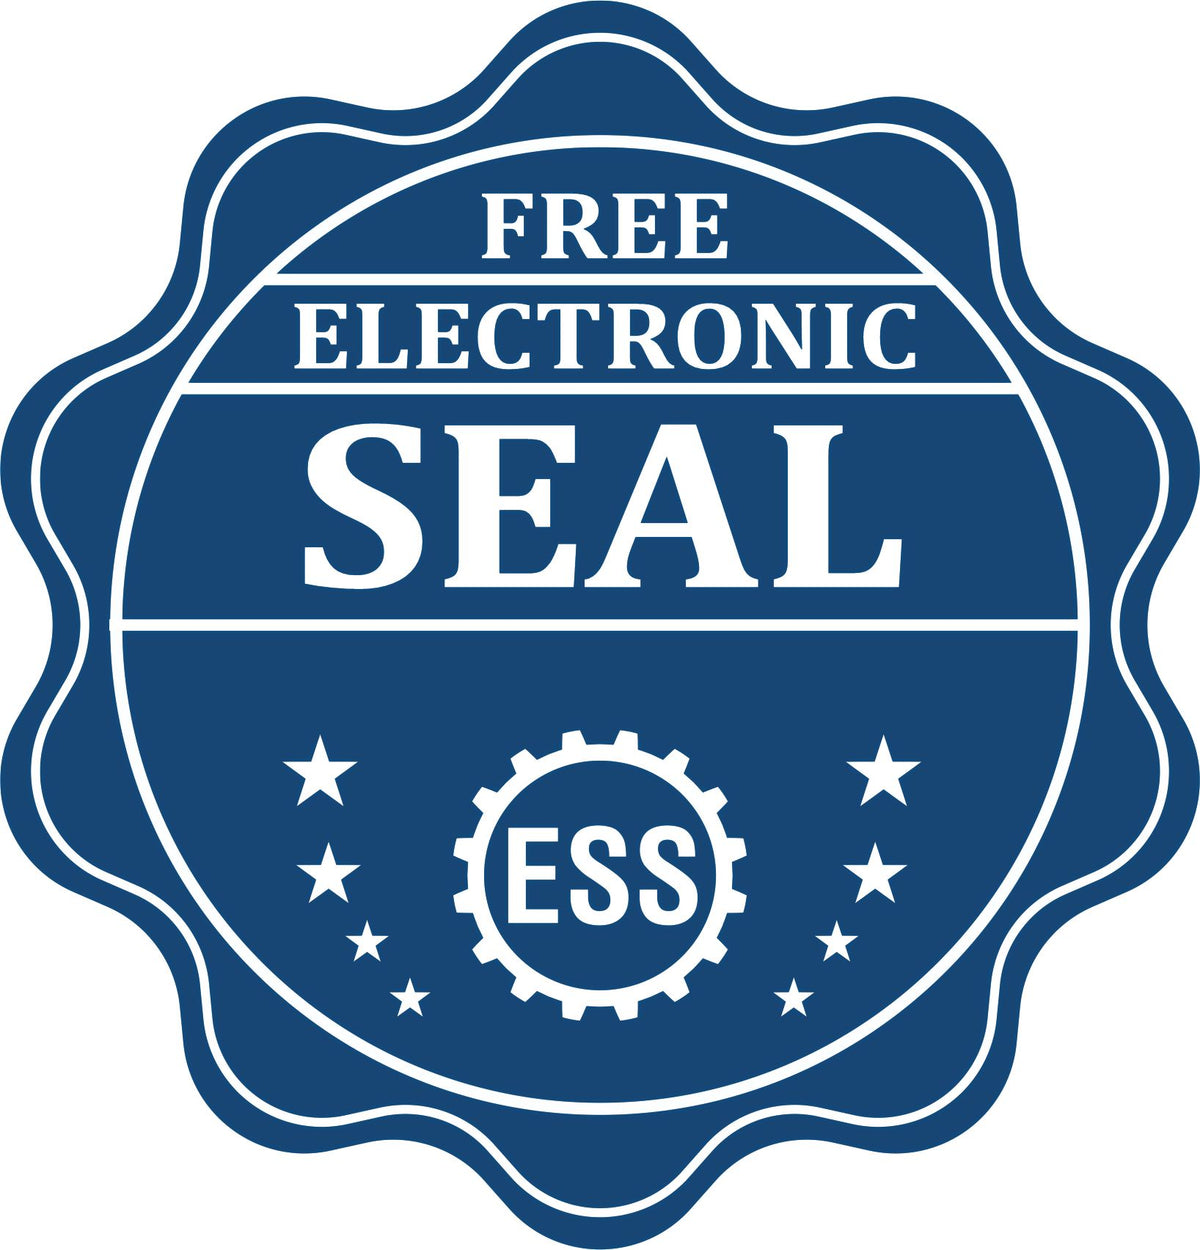 A badge showing a free electronic seal for the Premium MaxLight Pre-Inked Nevada Landscape Architectural Stamp with stars and the ESS gear on the emblem.